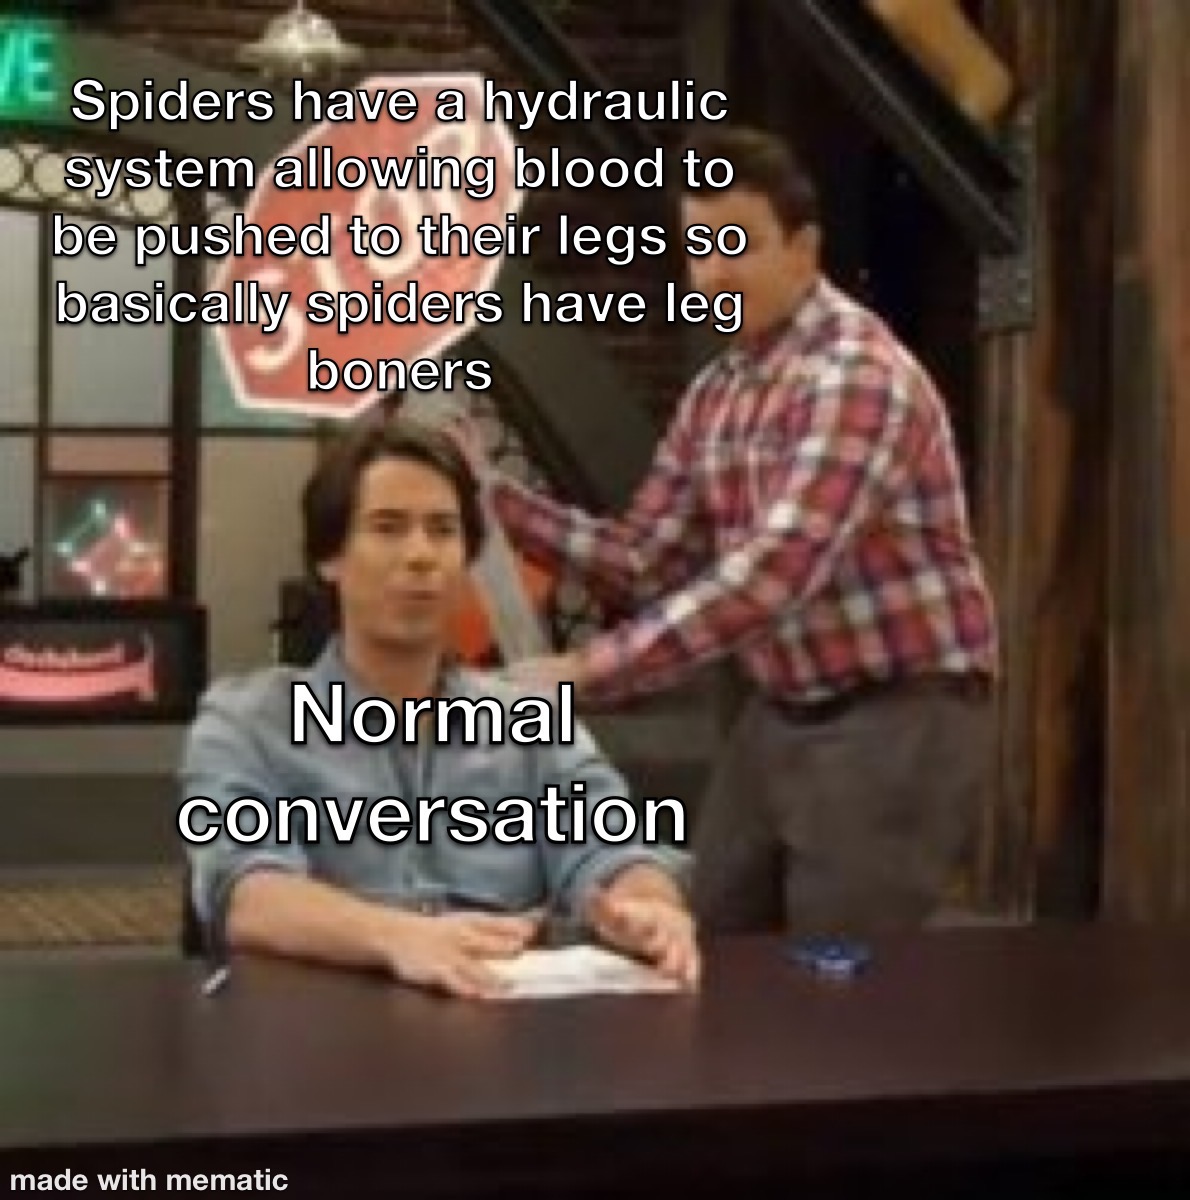 shrek is 20 years old - Ve Spiders have a hydraulic system allowing blood to be pushed to their legs so basically spiders have leg boners Normal conversation made with mematic